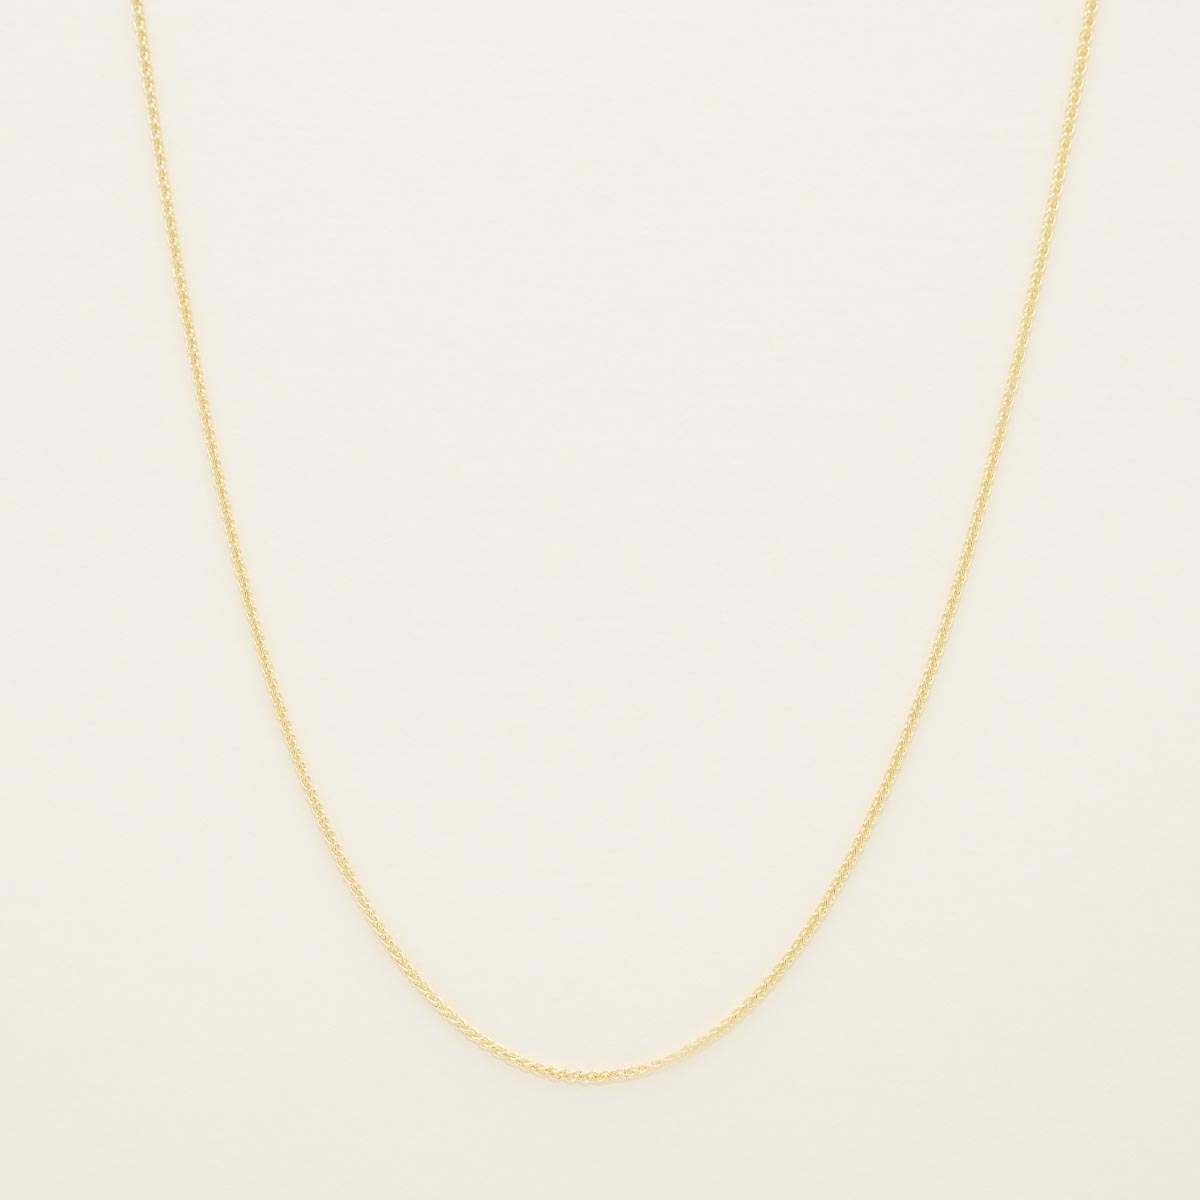 Wheat Chain in 14kt Yellow Gold (16-18 inches and 1mm wide)